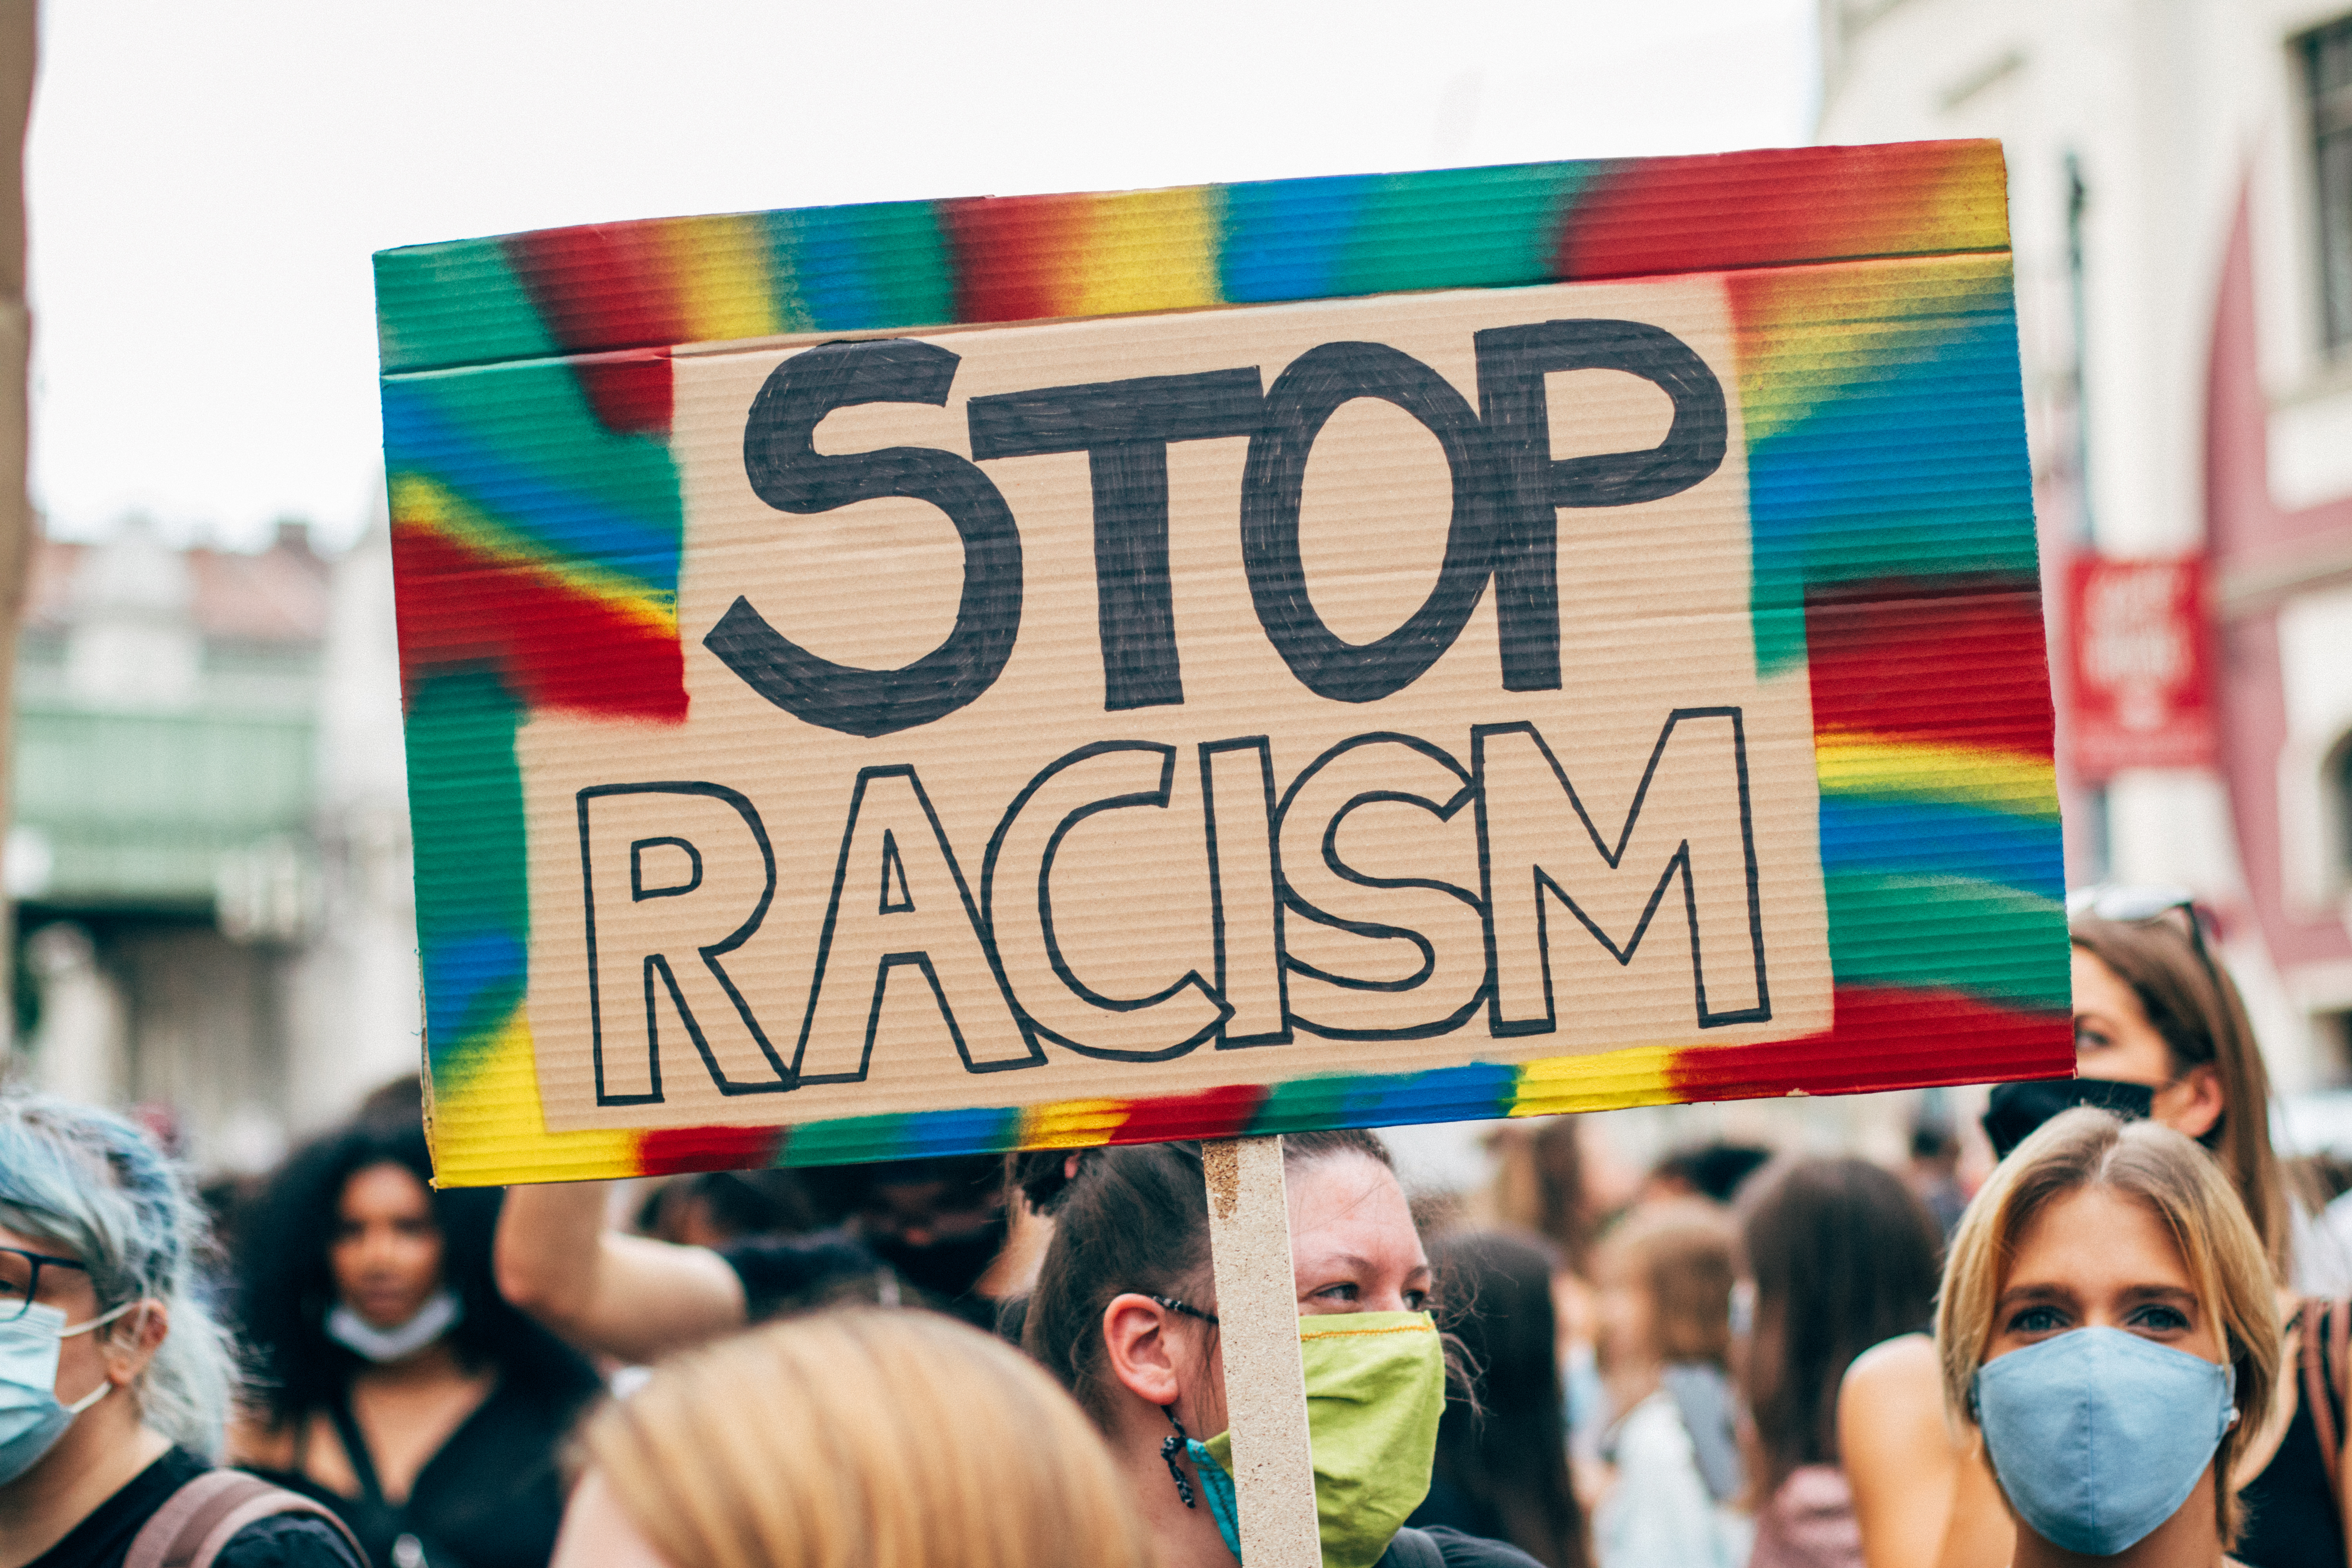 30 Racism Quotes to Help Fight Prejudice and Injustice